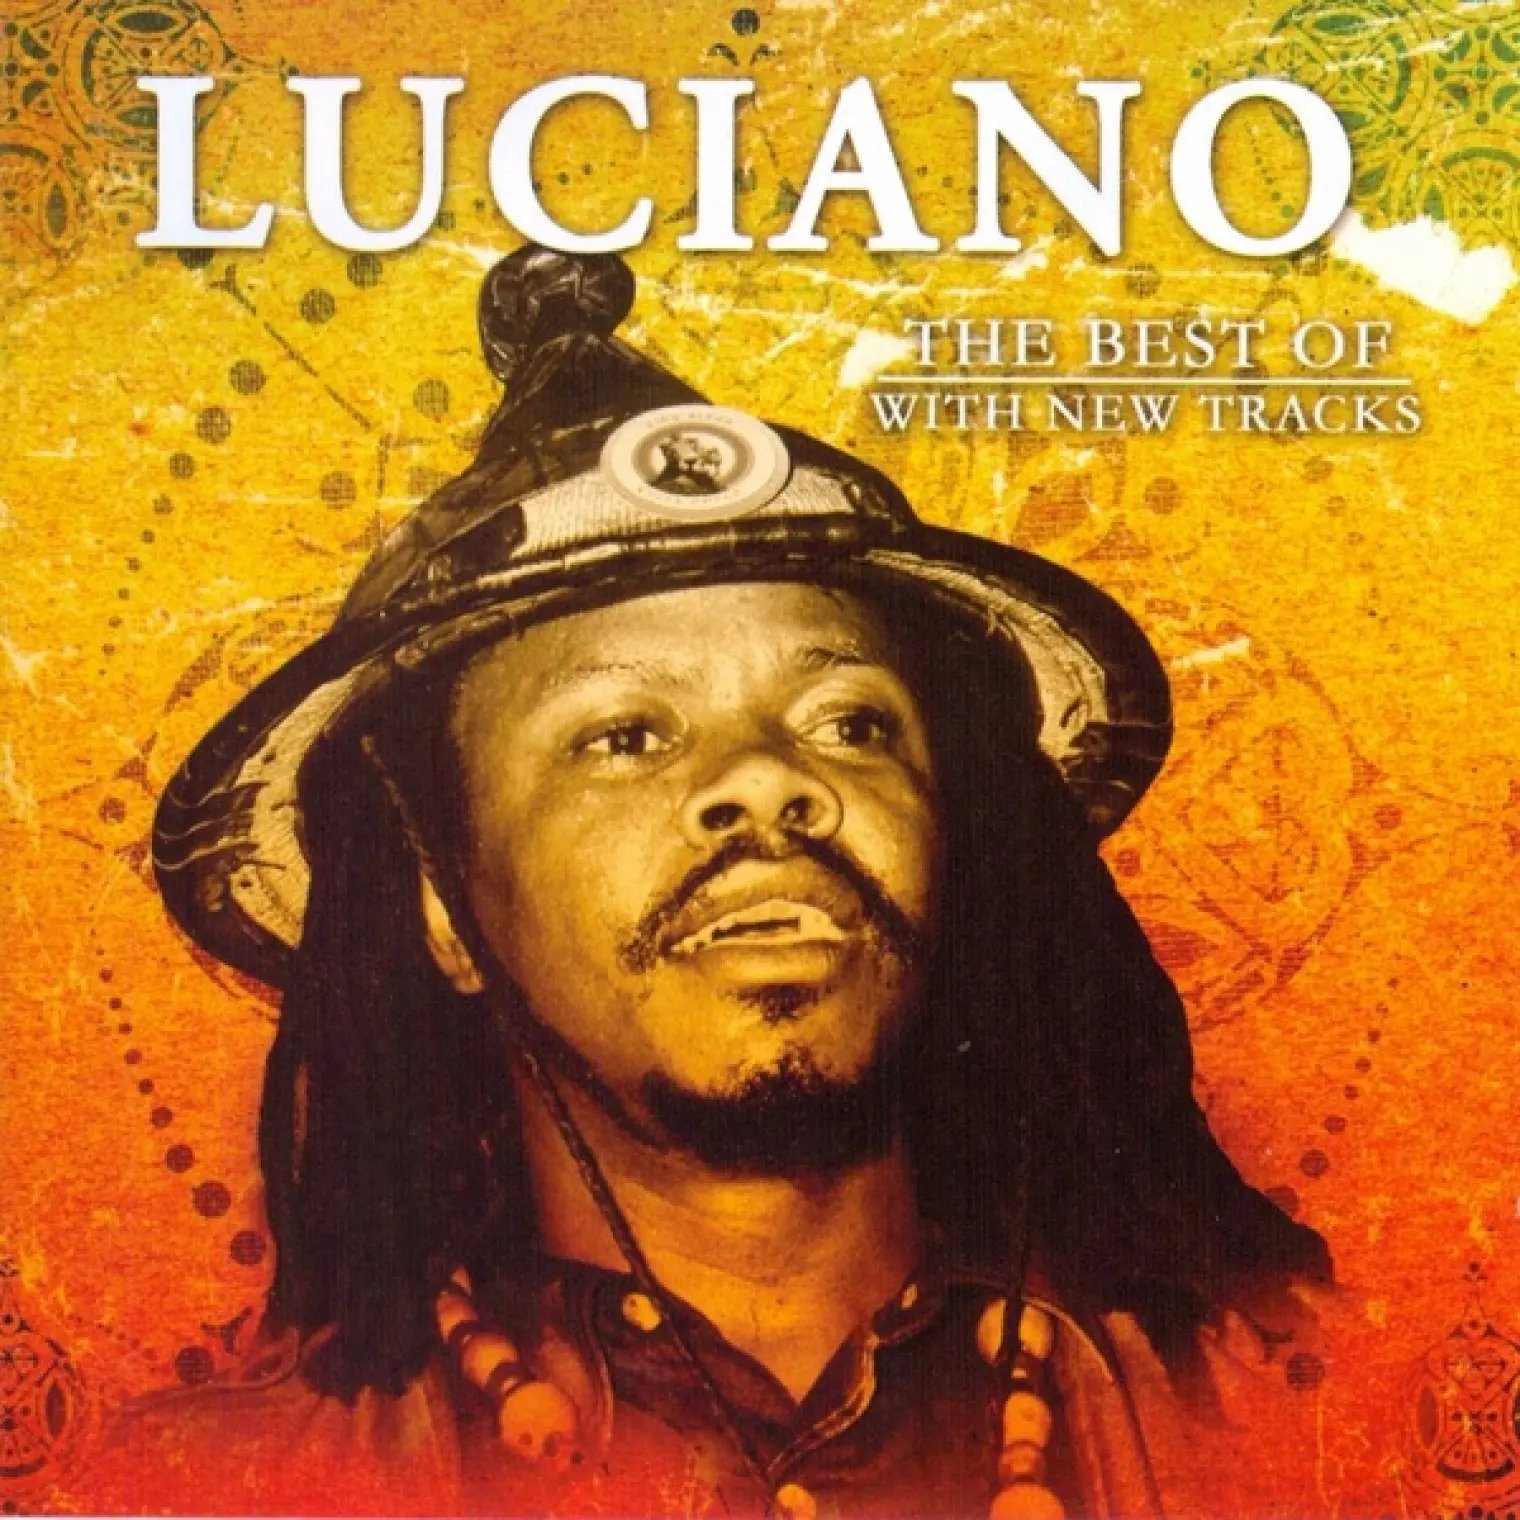 The Best of -  Luciano 